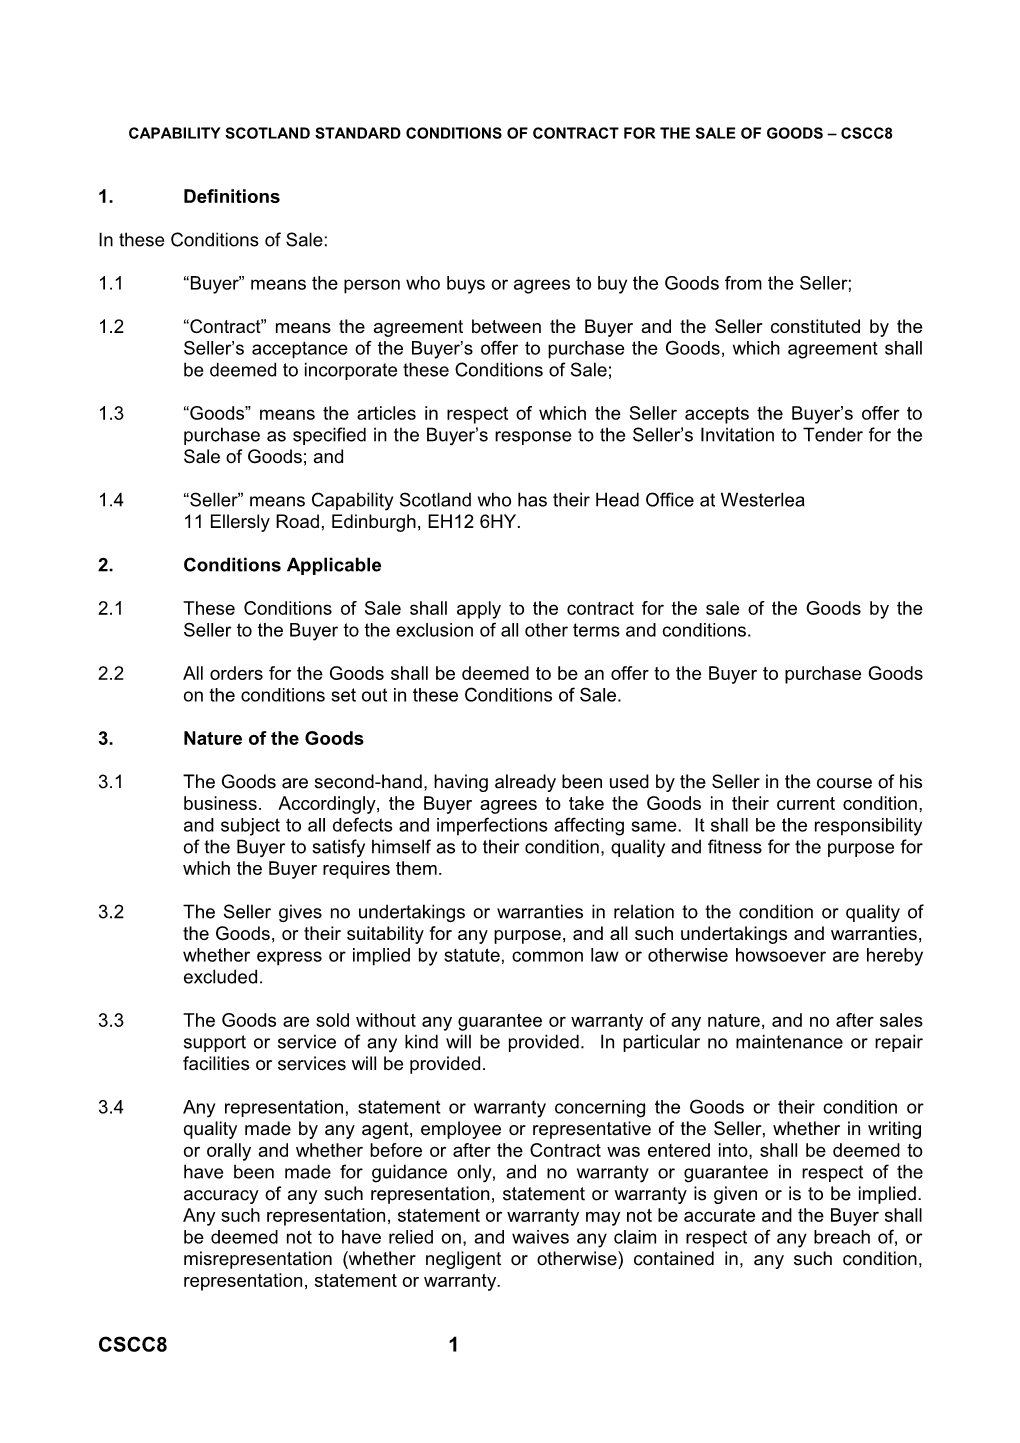 Capability Scotland Standard Conditions of Contract for the Sale of Goods Cscc8